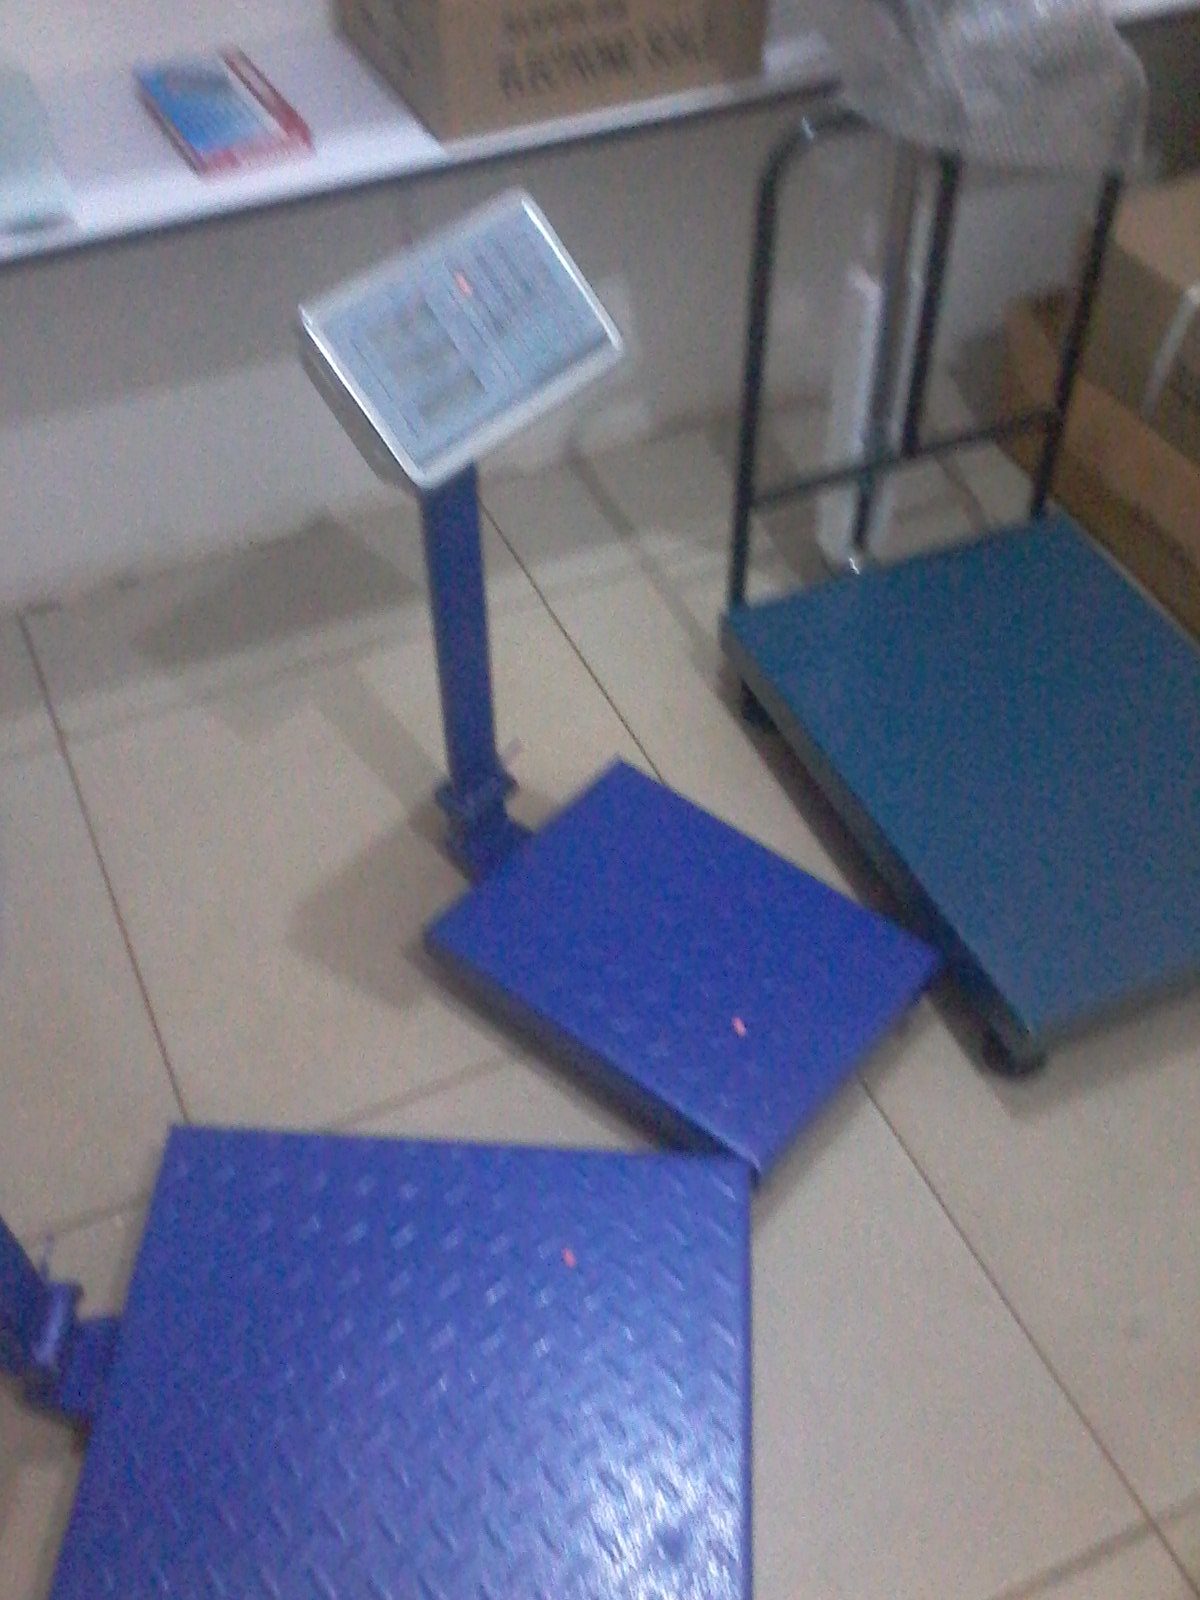 Bench weighing scales in Kampala